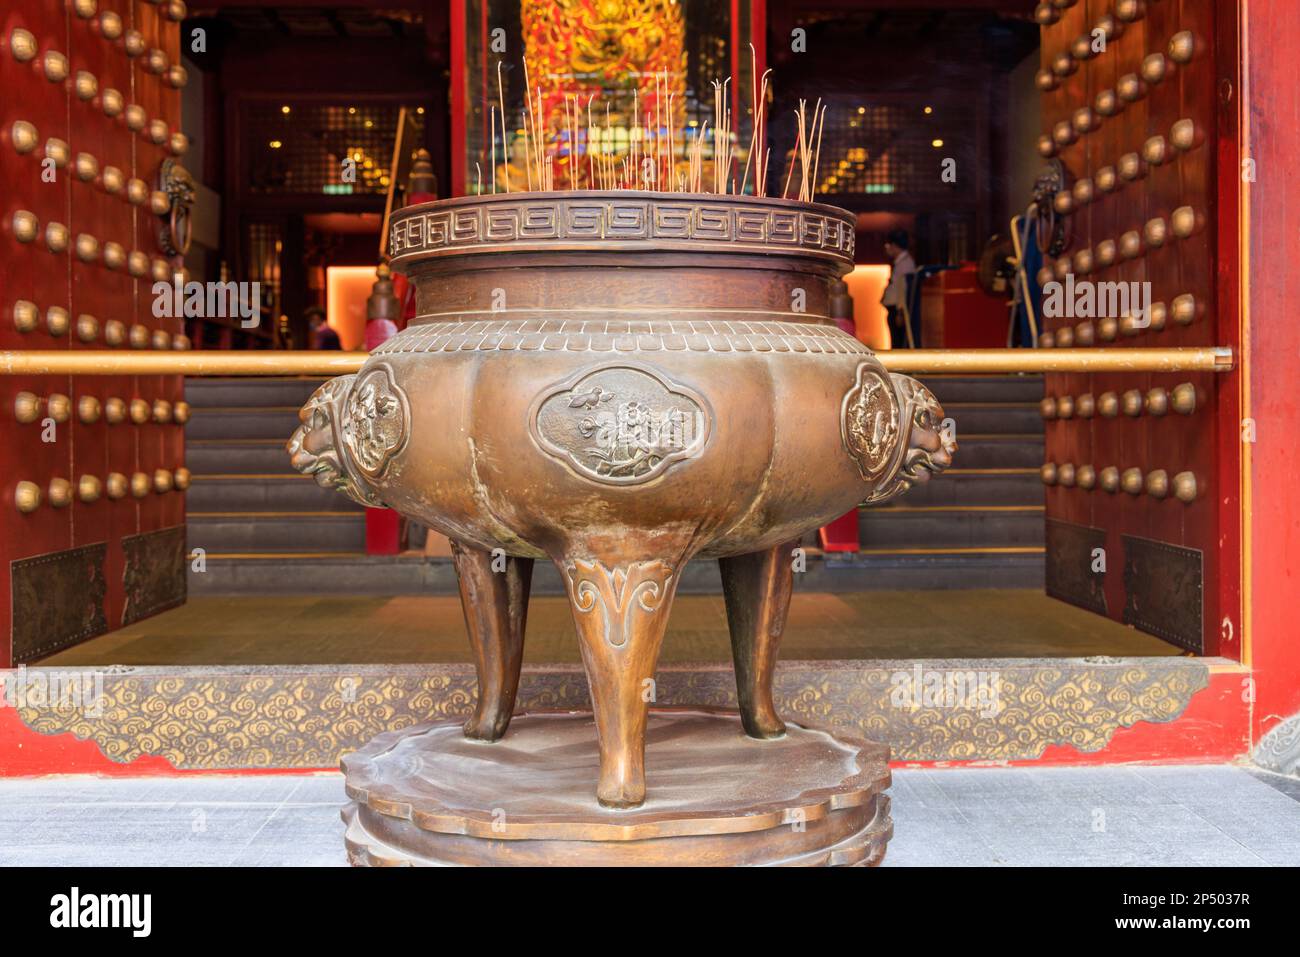 Large censer at the Buddha Tooth Relic Temple, Chinatown, Singapore Stock Photo